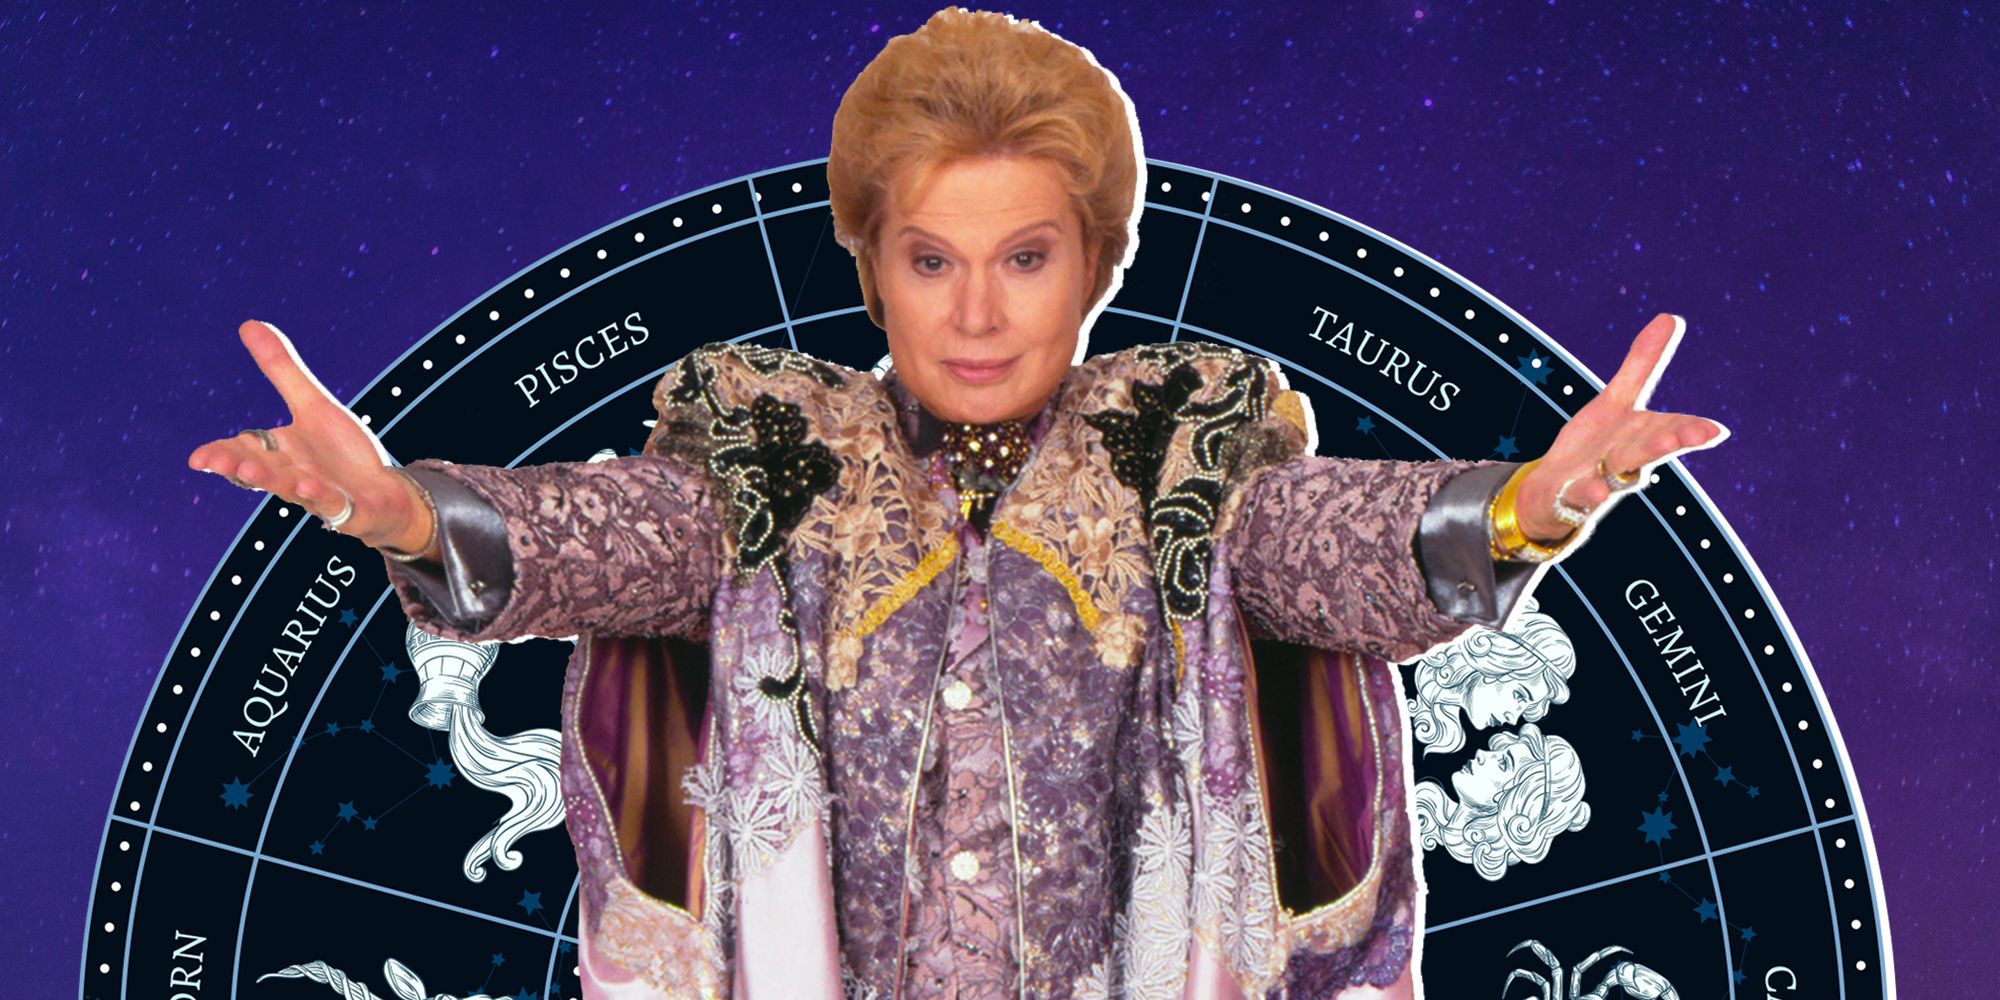 31-facts-about-walter-mercado